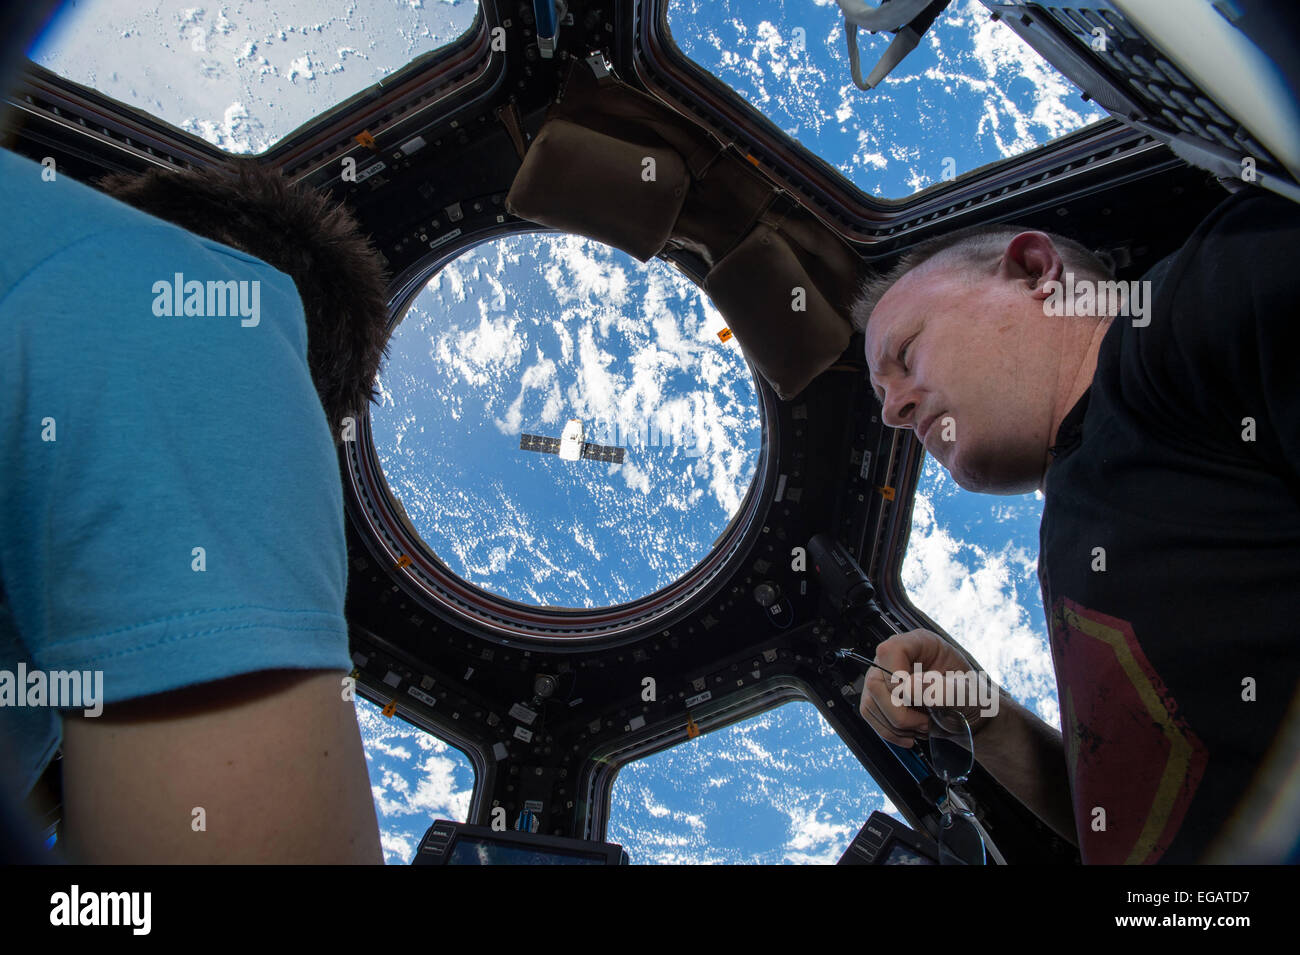 International Space Station Expedition 42 Commander and NASA Astronaut Barry Wilmore and European Space Agency Astronaut Samantha Cristoforetti view the SpaceX Dragon commercial cargo craft from inside the coupla as they maneuver the Canadarm 2 to dock the supply ship to the orbiting space station January 12, 2015 in Earth Orbit. Stock Photo